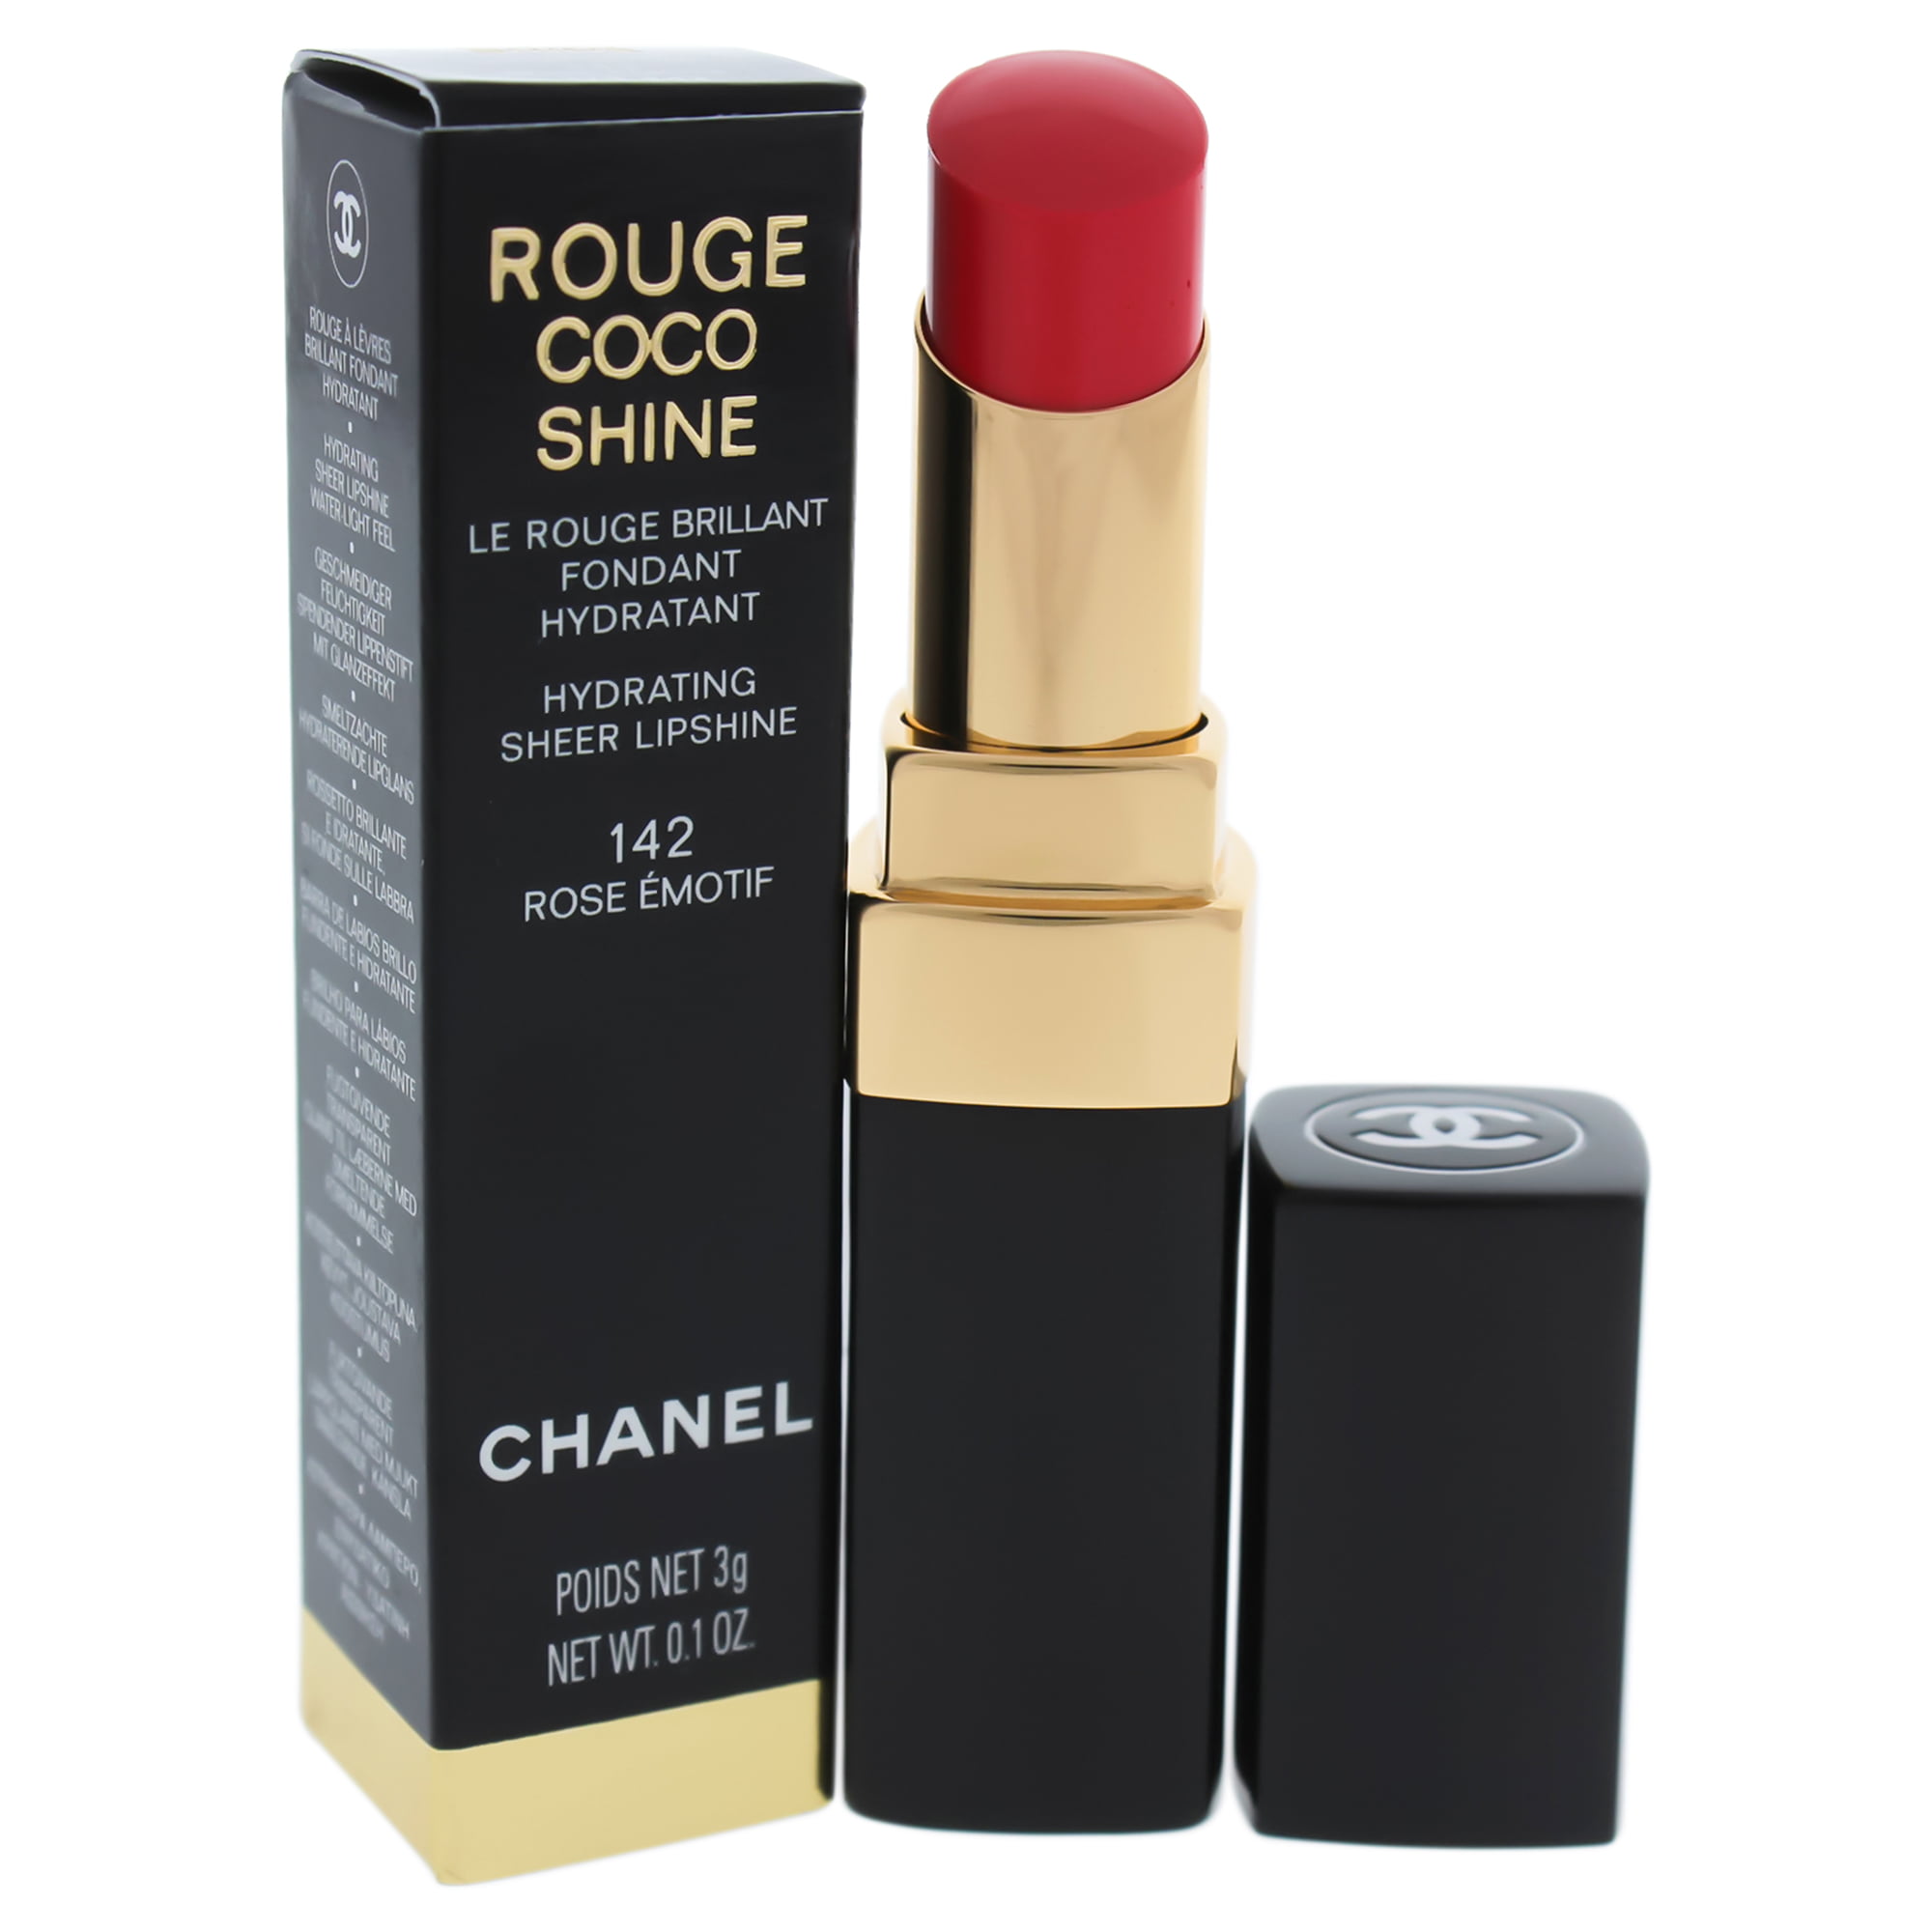 Rouge Coco Shine Hydrating Sheer Lipshine - 142 Rose Emotif by Chanel for  Women - 0.1 oz Lipstick